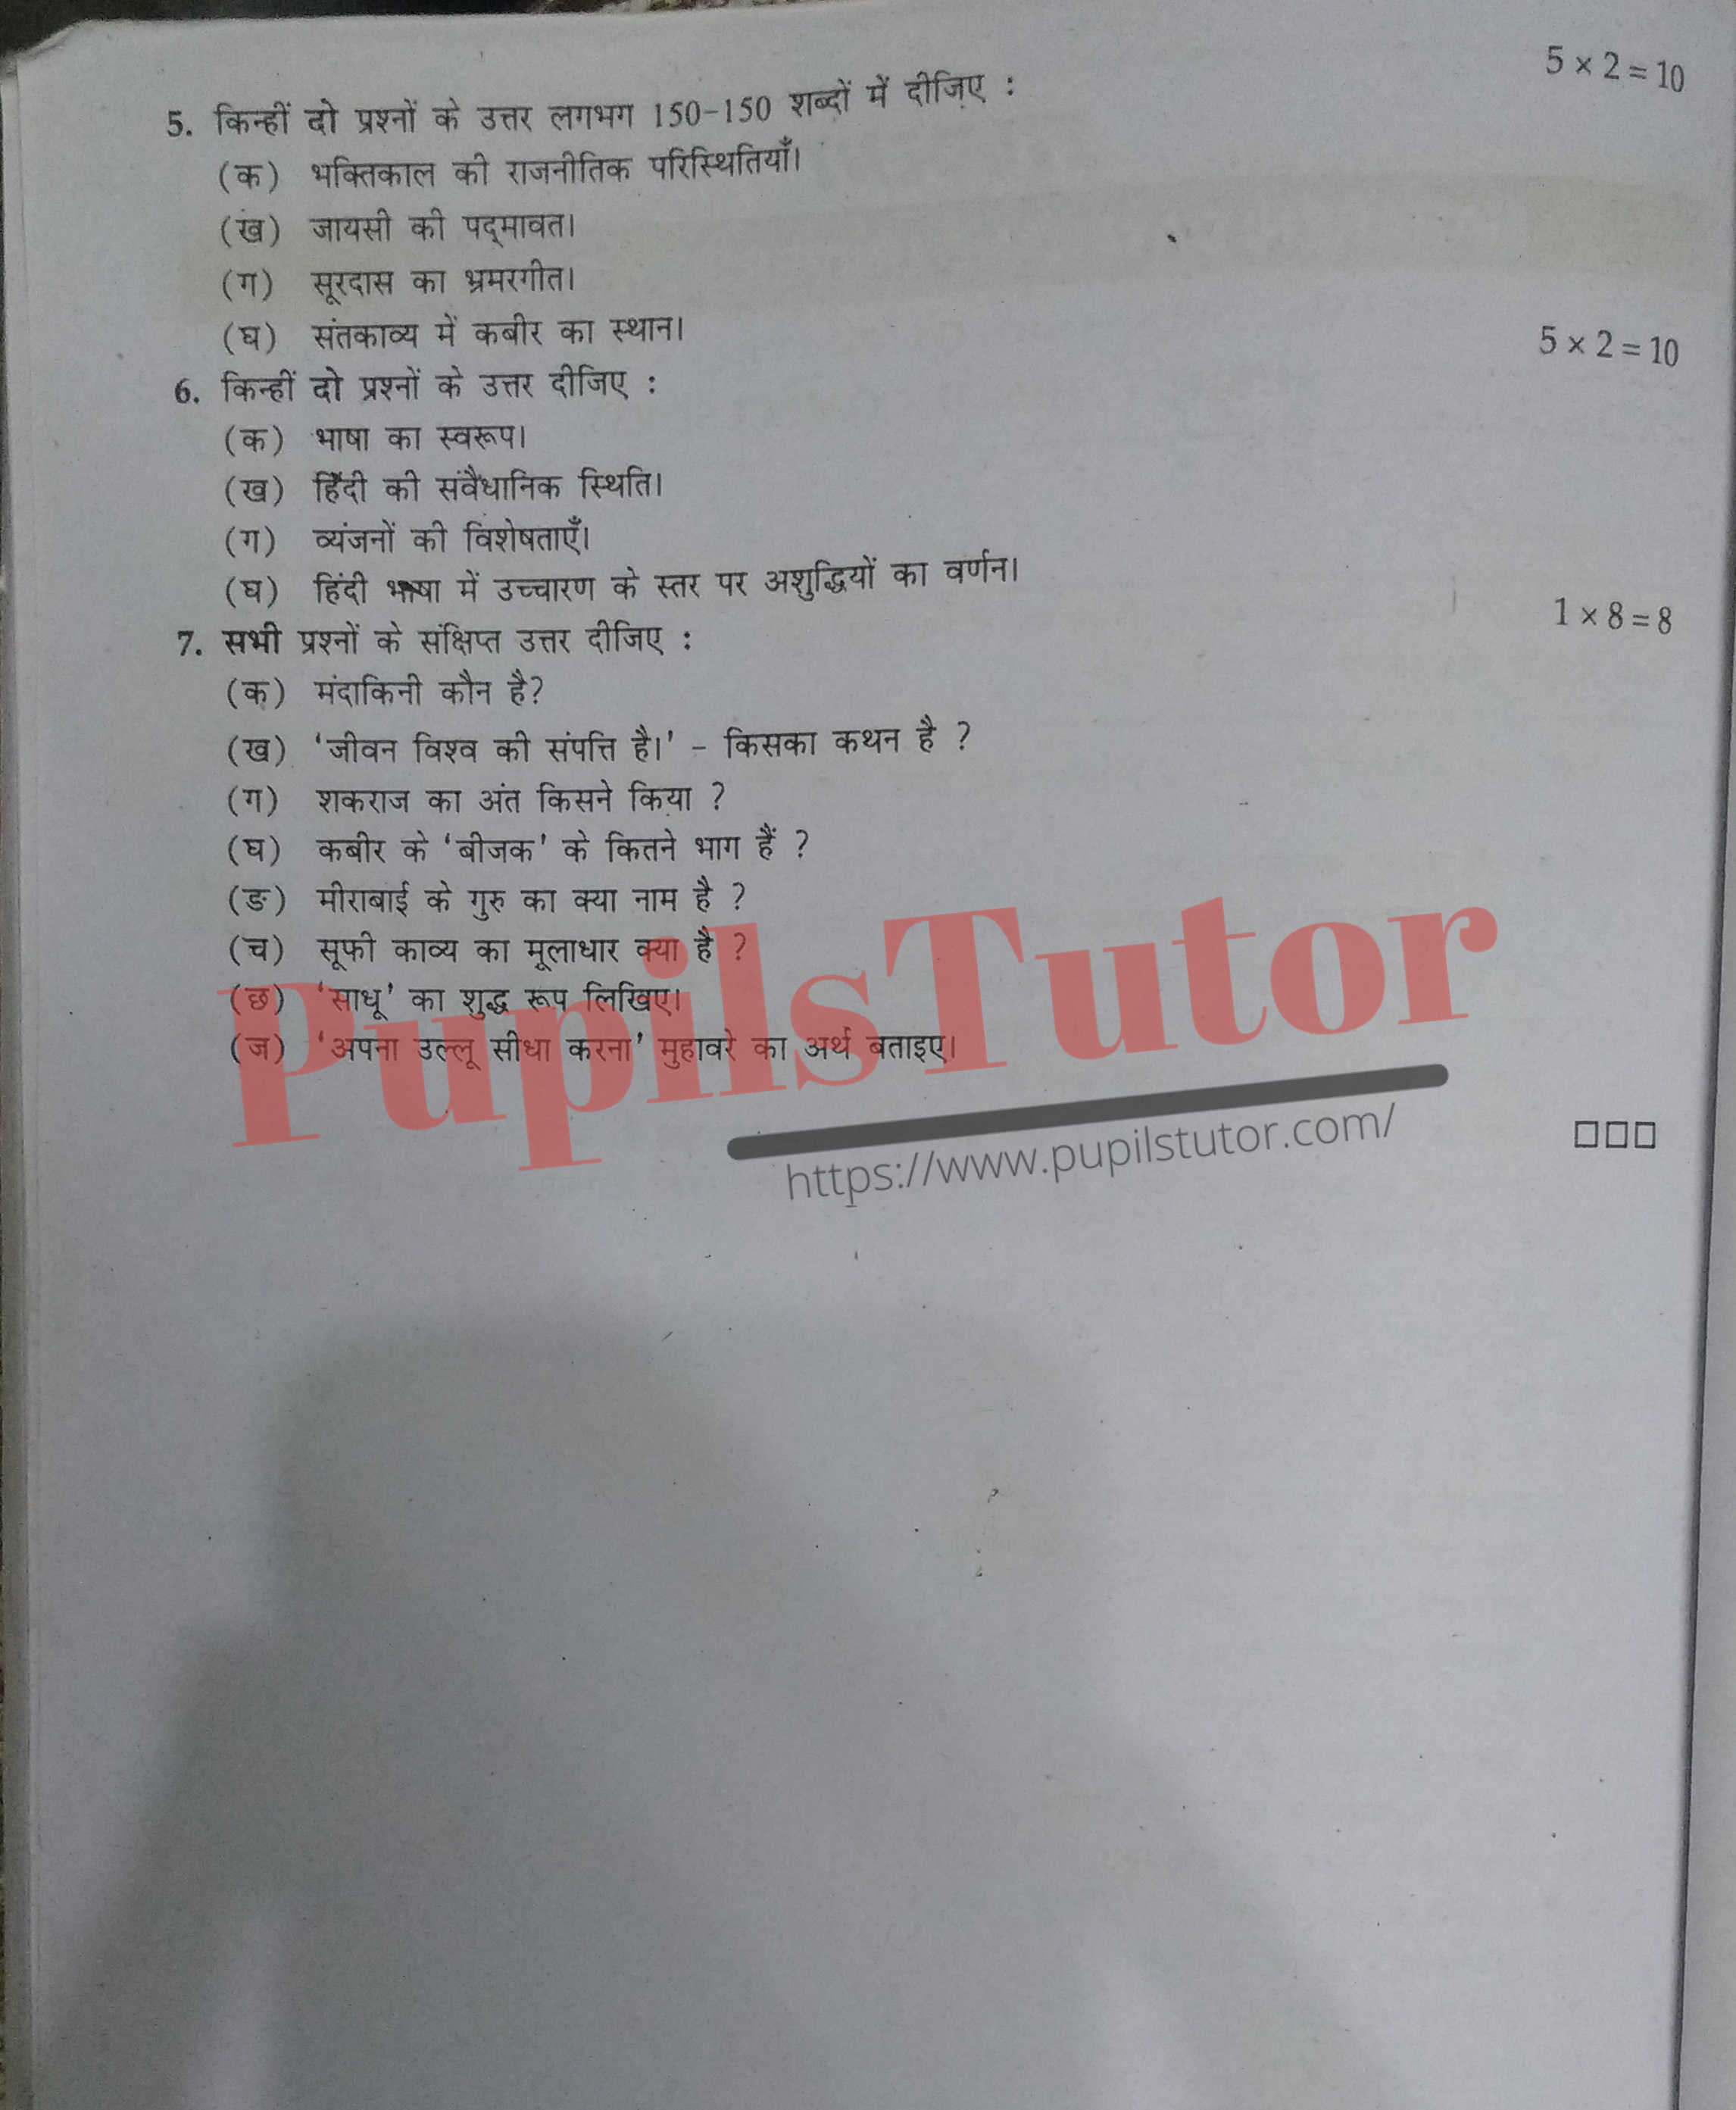 M.D. University B.A. Hindi (Compulsory) Second Semester Important Question Answer And Solution - www.pupilstutor.com (Paper Page Number 2)